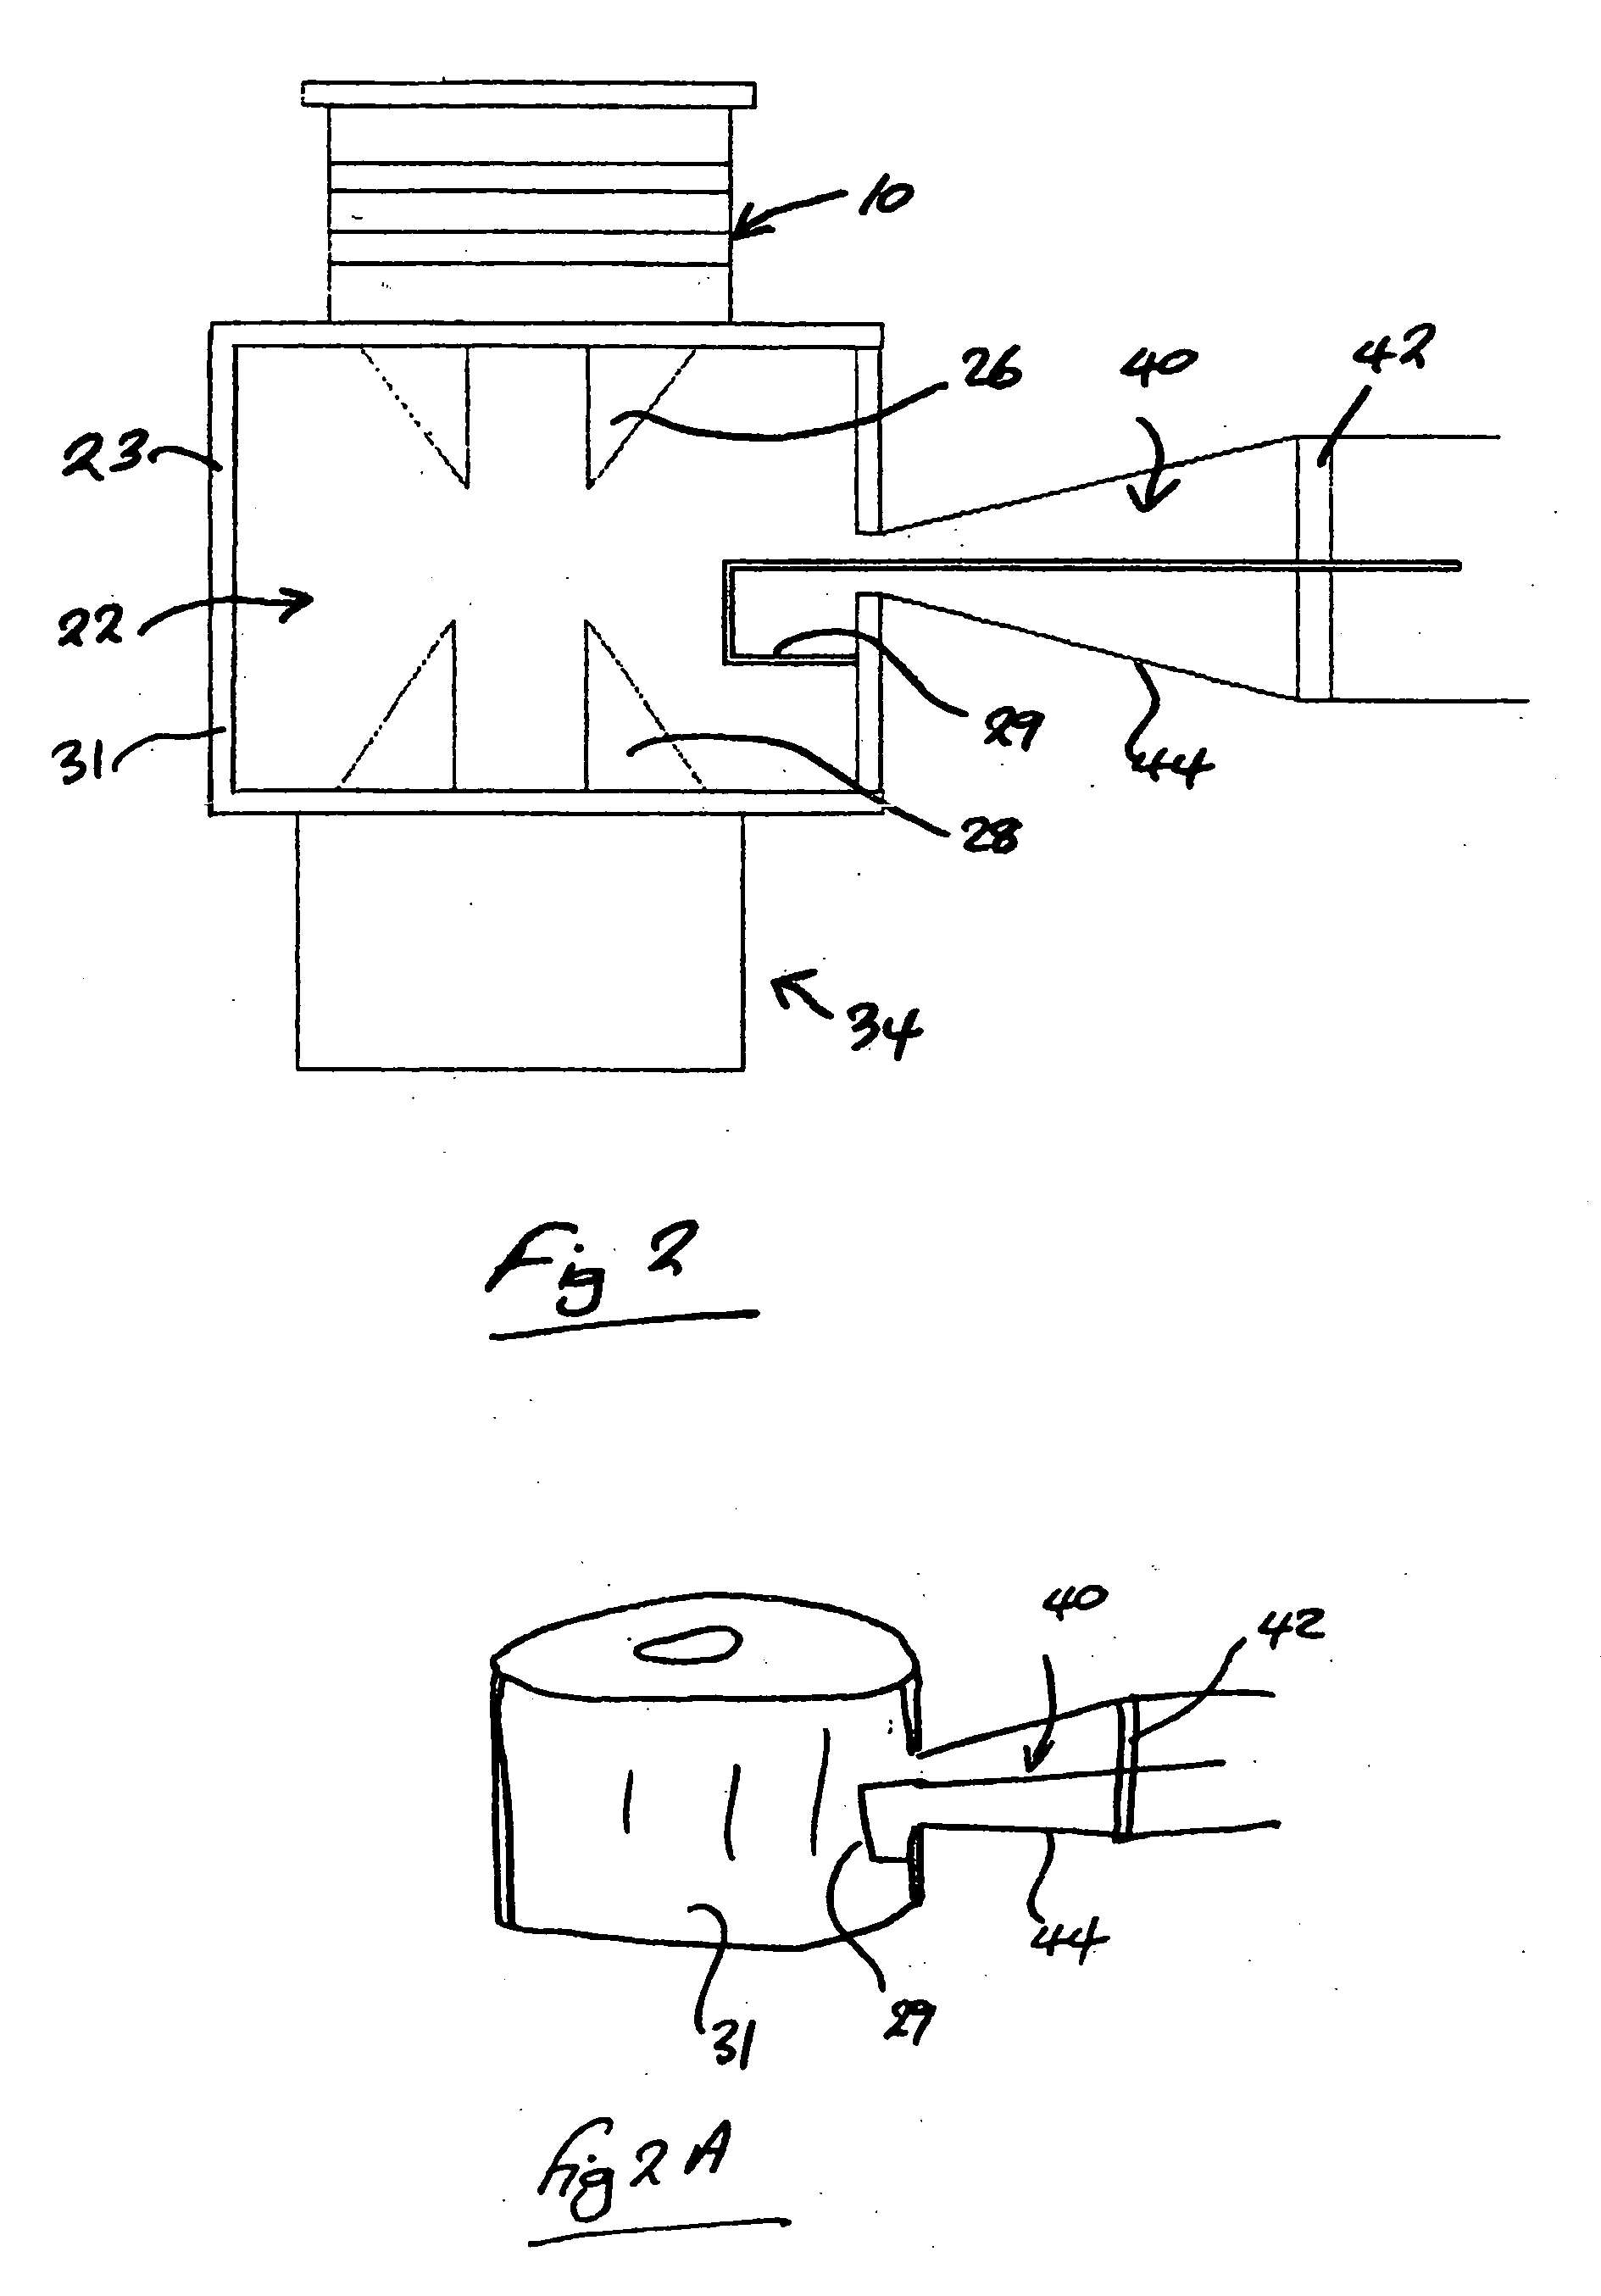 Magnetic assembly for a linear beam tube